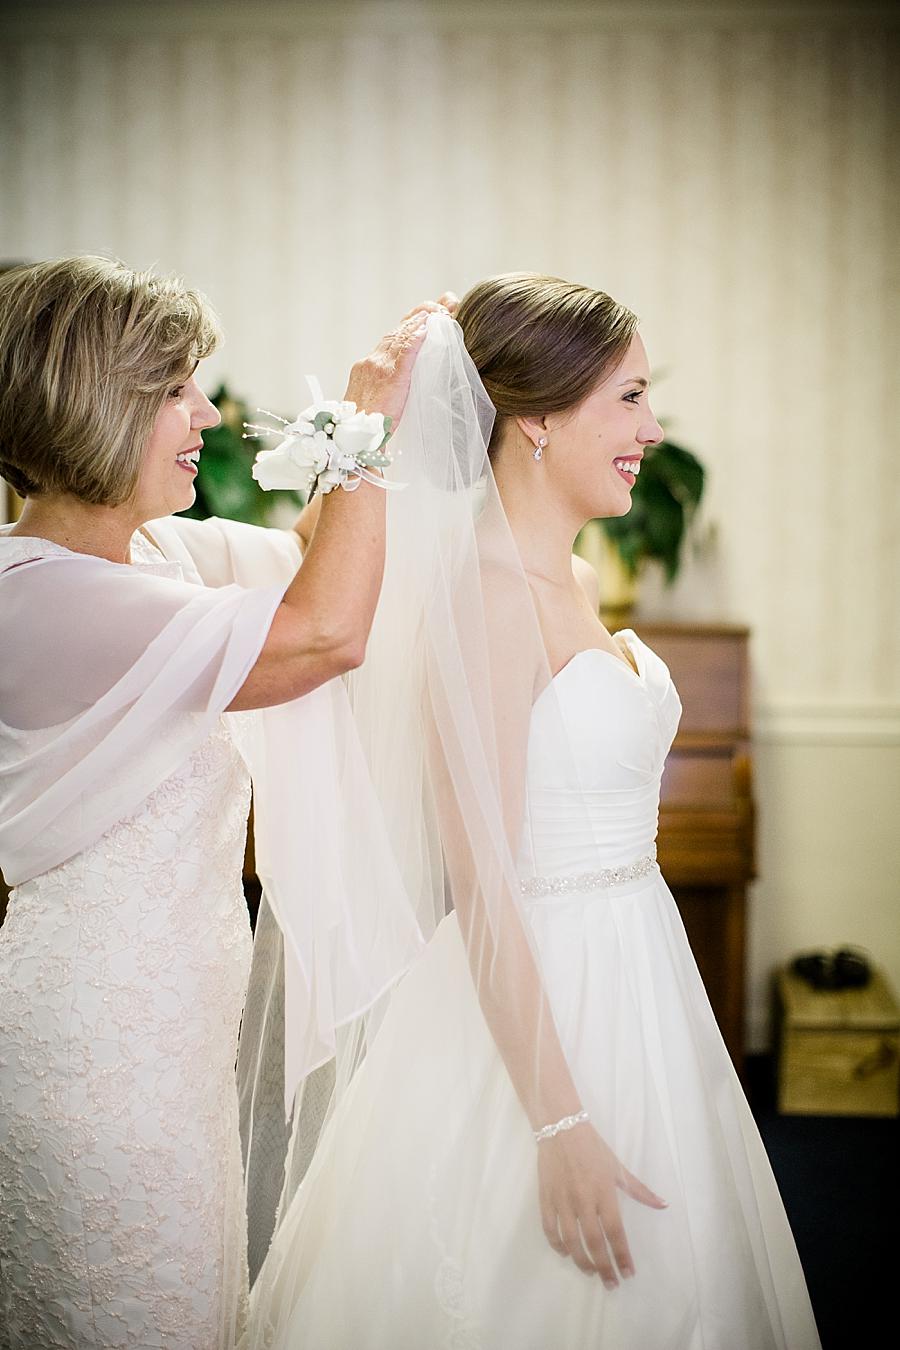 Putting on the veil at this Fountain City Church Wedding by Knoxville Wedding Photographer, Amanda May Photos.